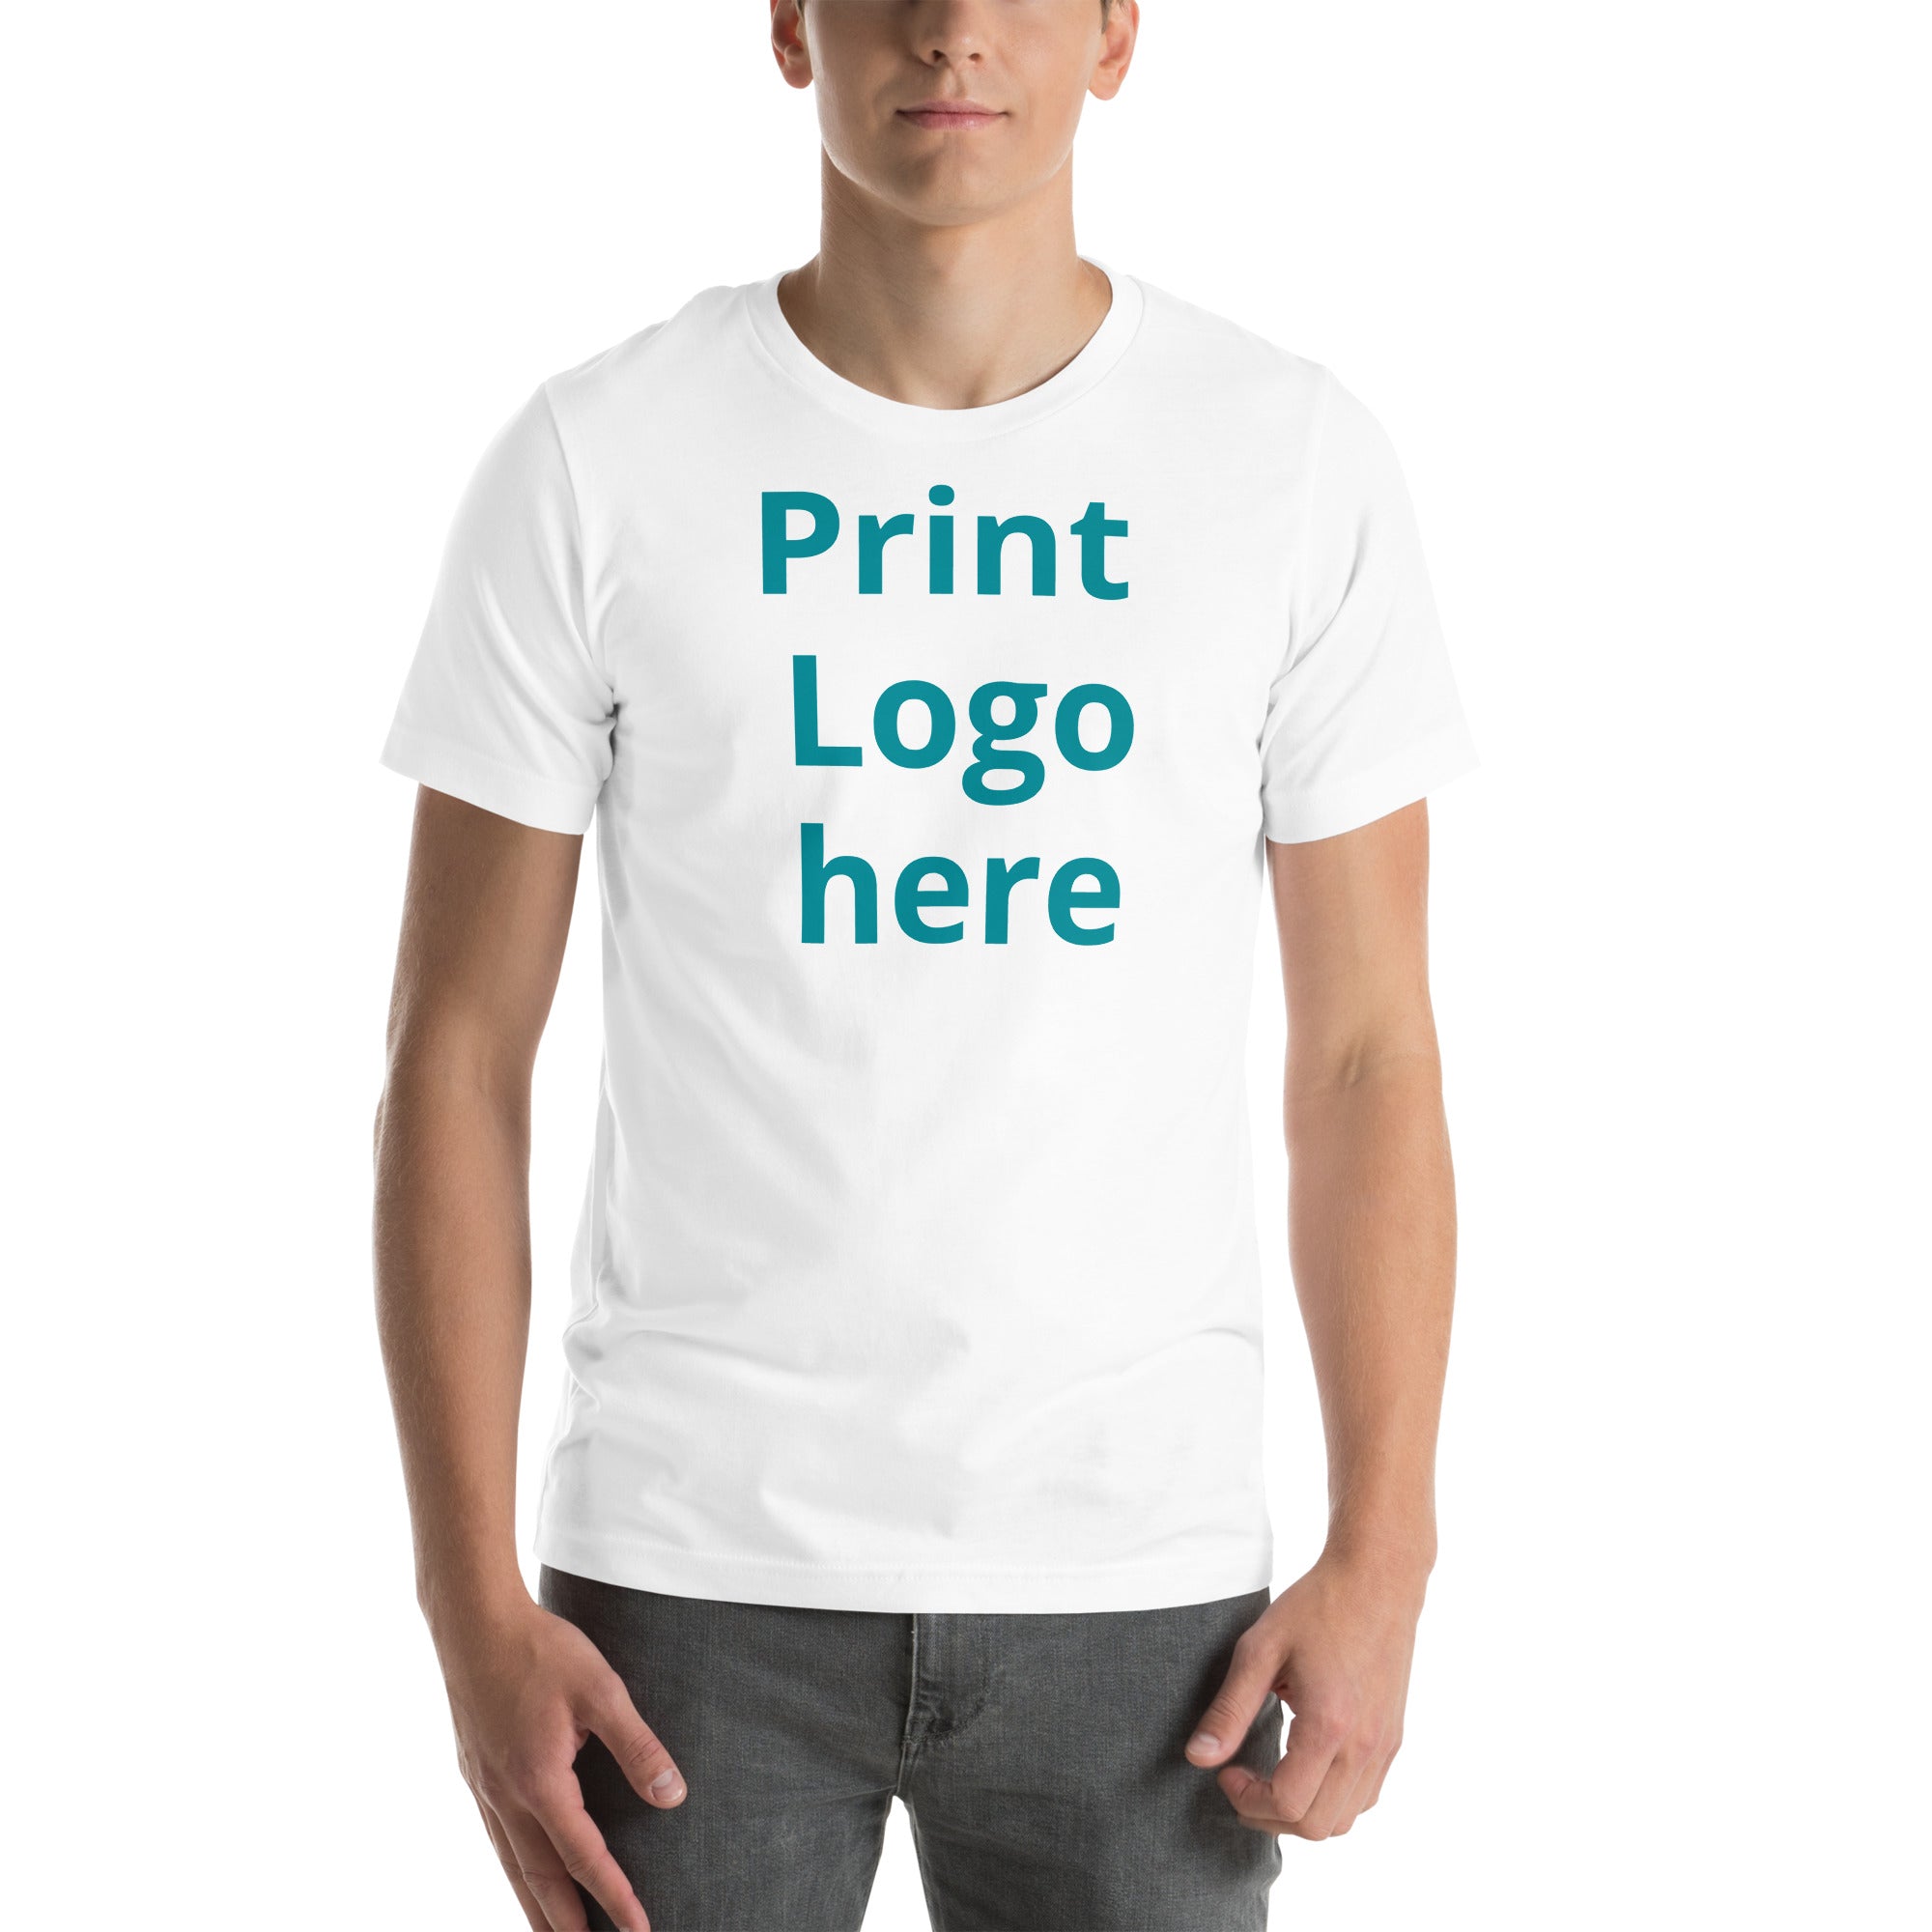 Print Business or company logo on t shirt